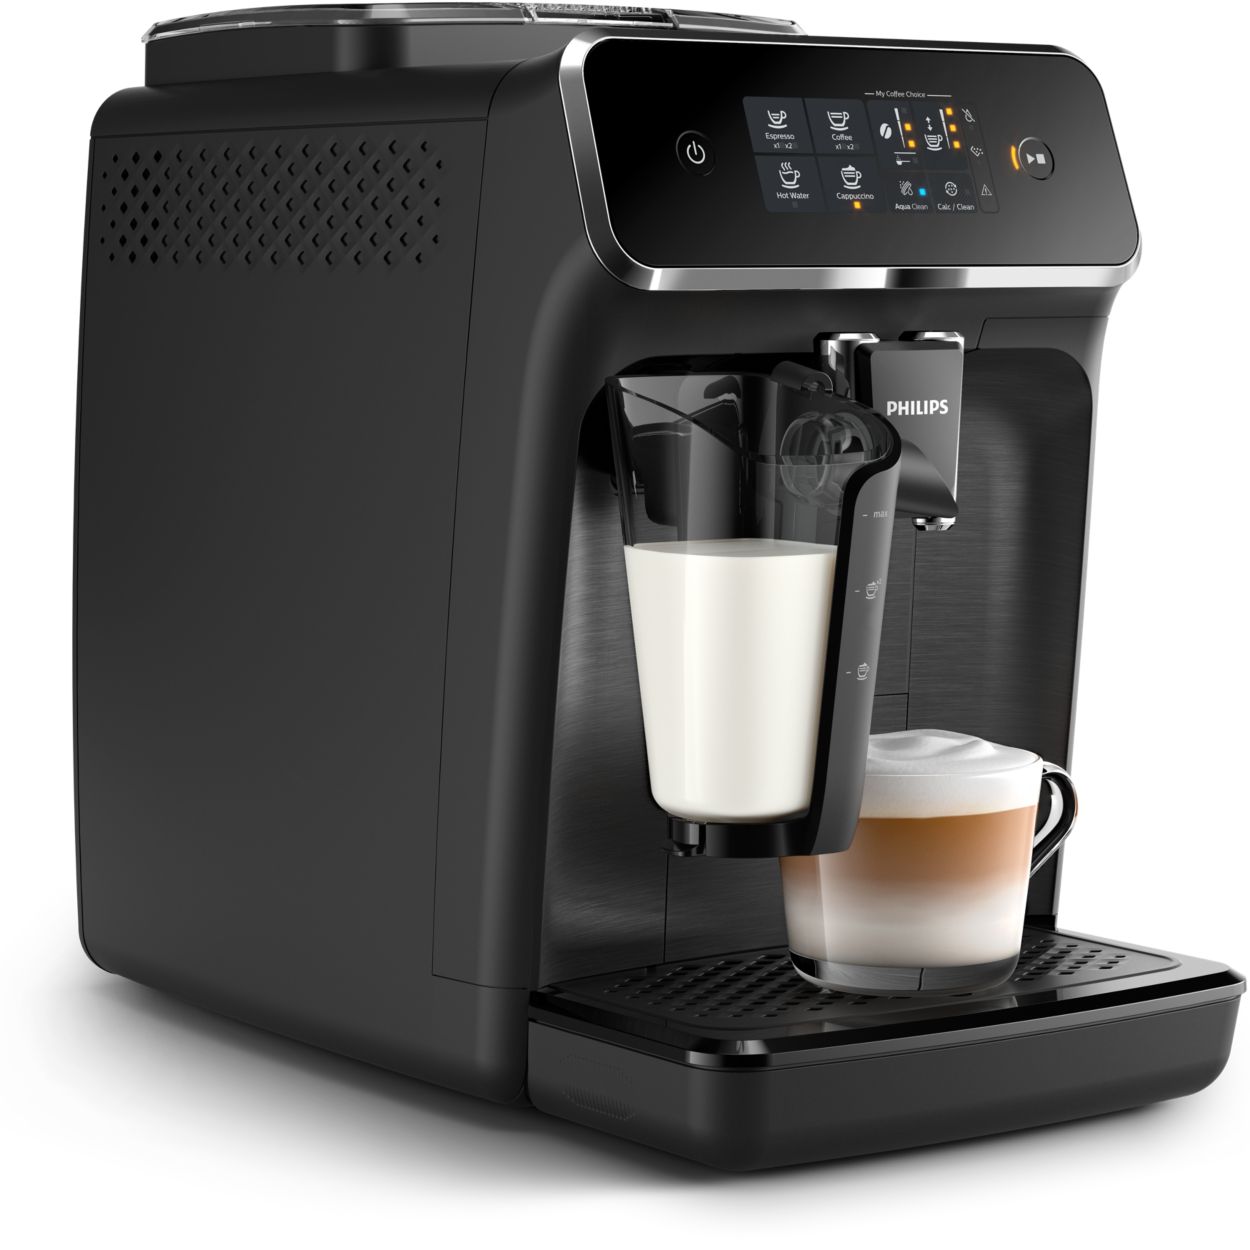  PHILIPS 2200 Series Fully Automatic Espresso Machine, Classic  Milk Frother, 2 Coffee Varieties, Intuitive Touch Display, 100% Ceramic  Grinder, AquaClean Filter, Aroma Seal, Black (EP2220/14): Home & Kitchen